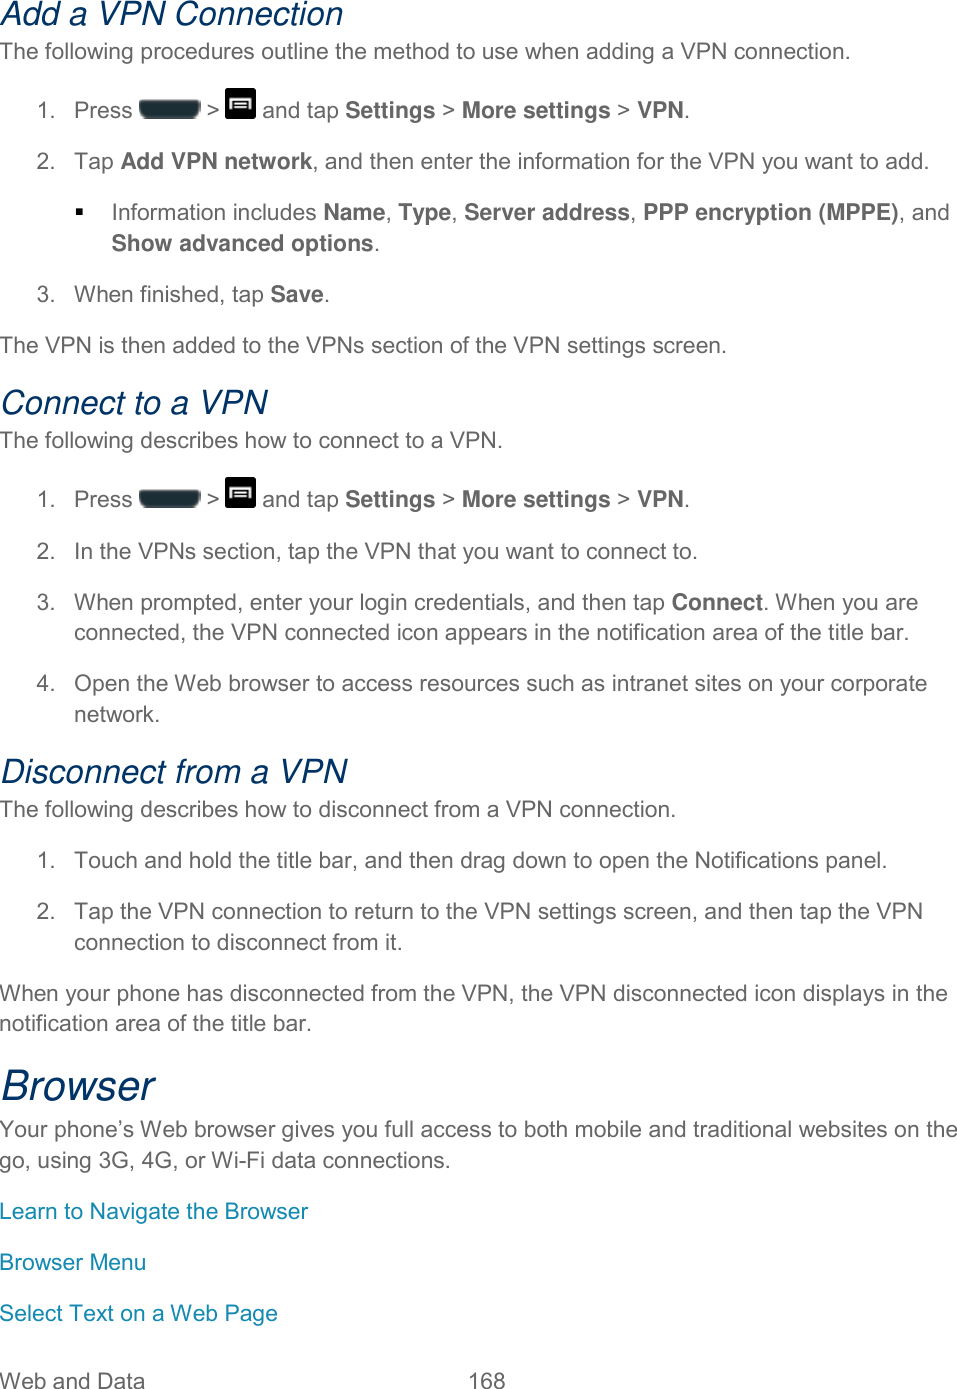 Web and Data  168   Add a VPN Connection The following procedures outline the method to use when adding a VPN connection. 1.  Press   &gt;   and tap Settings &gt; More settings &gt; VPN. 2.  Tap Add VPN network, and then enter the information for the VPN you want to add.  Information includes Name, Type, Server address, PPP encryption (MPPE), and Show advanced options. 3.  When finished, tap Save. The VPN is then added to the VPNs section of the VPN settings screen. Connect to a VPN The following describes how to connect to a VPN. 1. Press   &gt;   and tap Settings &gt; More settings &gt; VPN. 2.  In the VPNs section, tap the VPN that you want to connect to. 3.  When prompted, enter your login credentials, and then tap Connect. When you are connected, the VPN connected icon appears in the notification area of the title bar. 4.  Open the Web browser to access resources such as intranet sites on your corporate network.  Disconnect from a VPN The following describes how to disconnect from a VPN connection. 1.  Touch and hold the title bar, and then drag down to open the Notifications panel. 2.  Tap the VPN connection to return to the VPN settings screen, and then tap the VPN connection to disconnect from it.  When your phone has disconnected from the VPN, the VPN disconnected icon displays in the notification area of the title bar. Browser Your phone’s Web browser gives you full access to both mobile and traditional websites on the go, using 3G, 4G, or Wi-Fi data connections.  Learn to Navigate the Browser Browser Menu Select Text on a Web Page 